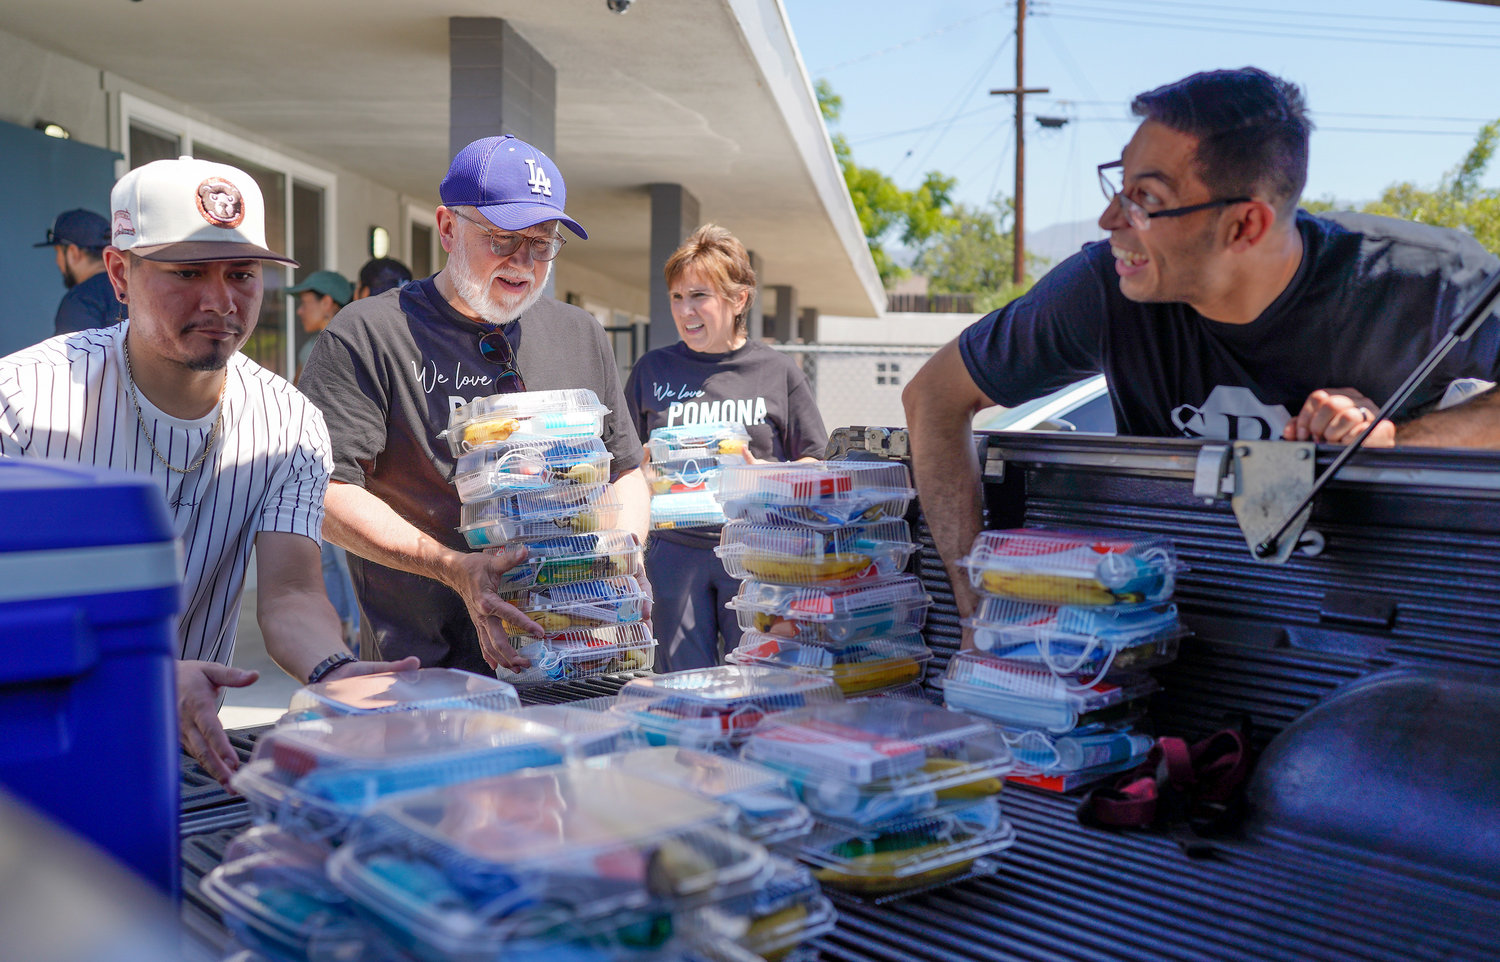 Southern Baptist Convention President Ed Litton, center, and his wife, Kathy, stack boxes of food with Leo Sanchez, left, and Jorge Valencia, right, at Salvo Por Gratia in Pomona, Calif., June 11, 2022. The food was distributed to homeless in the community as part of Crossover Anaheim. (NAMB/Adam Covington)